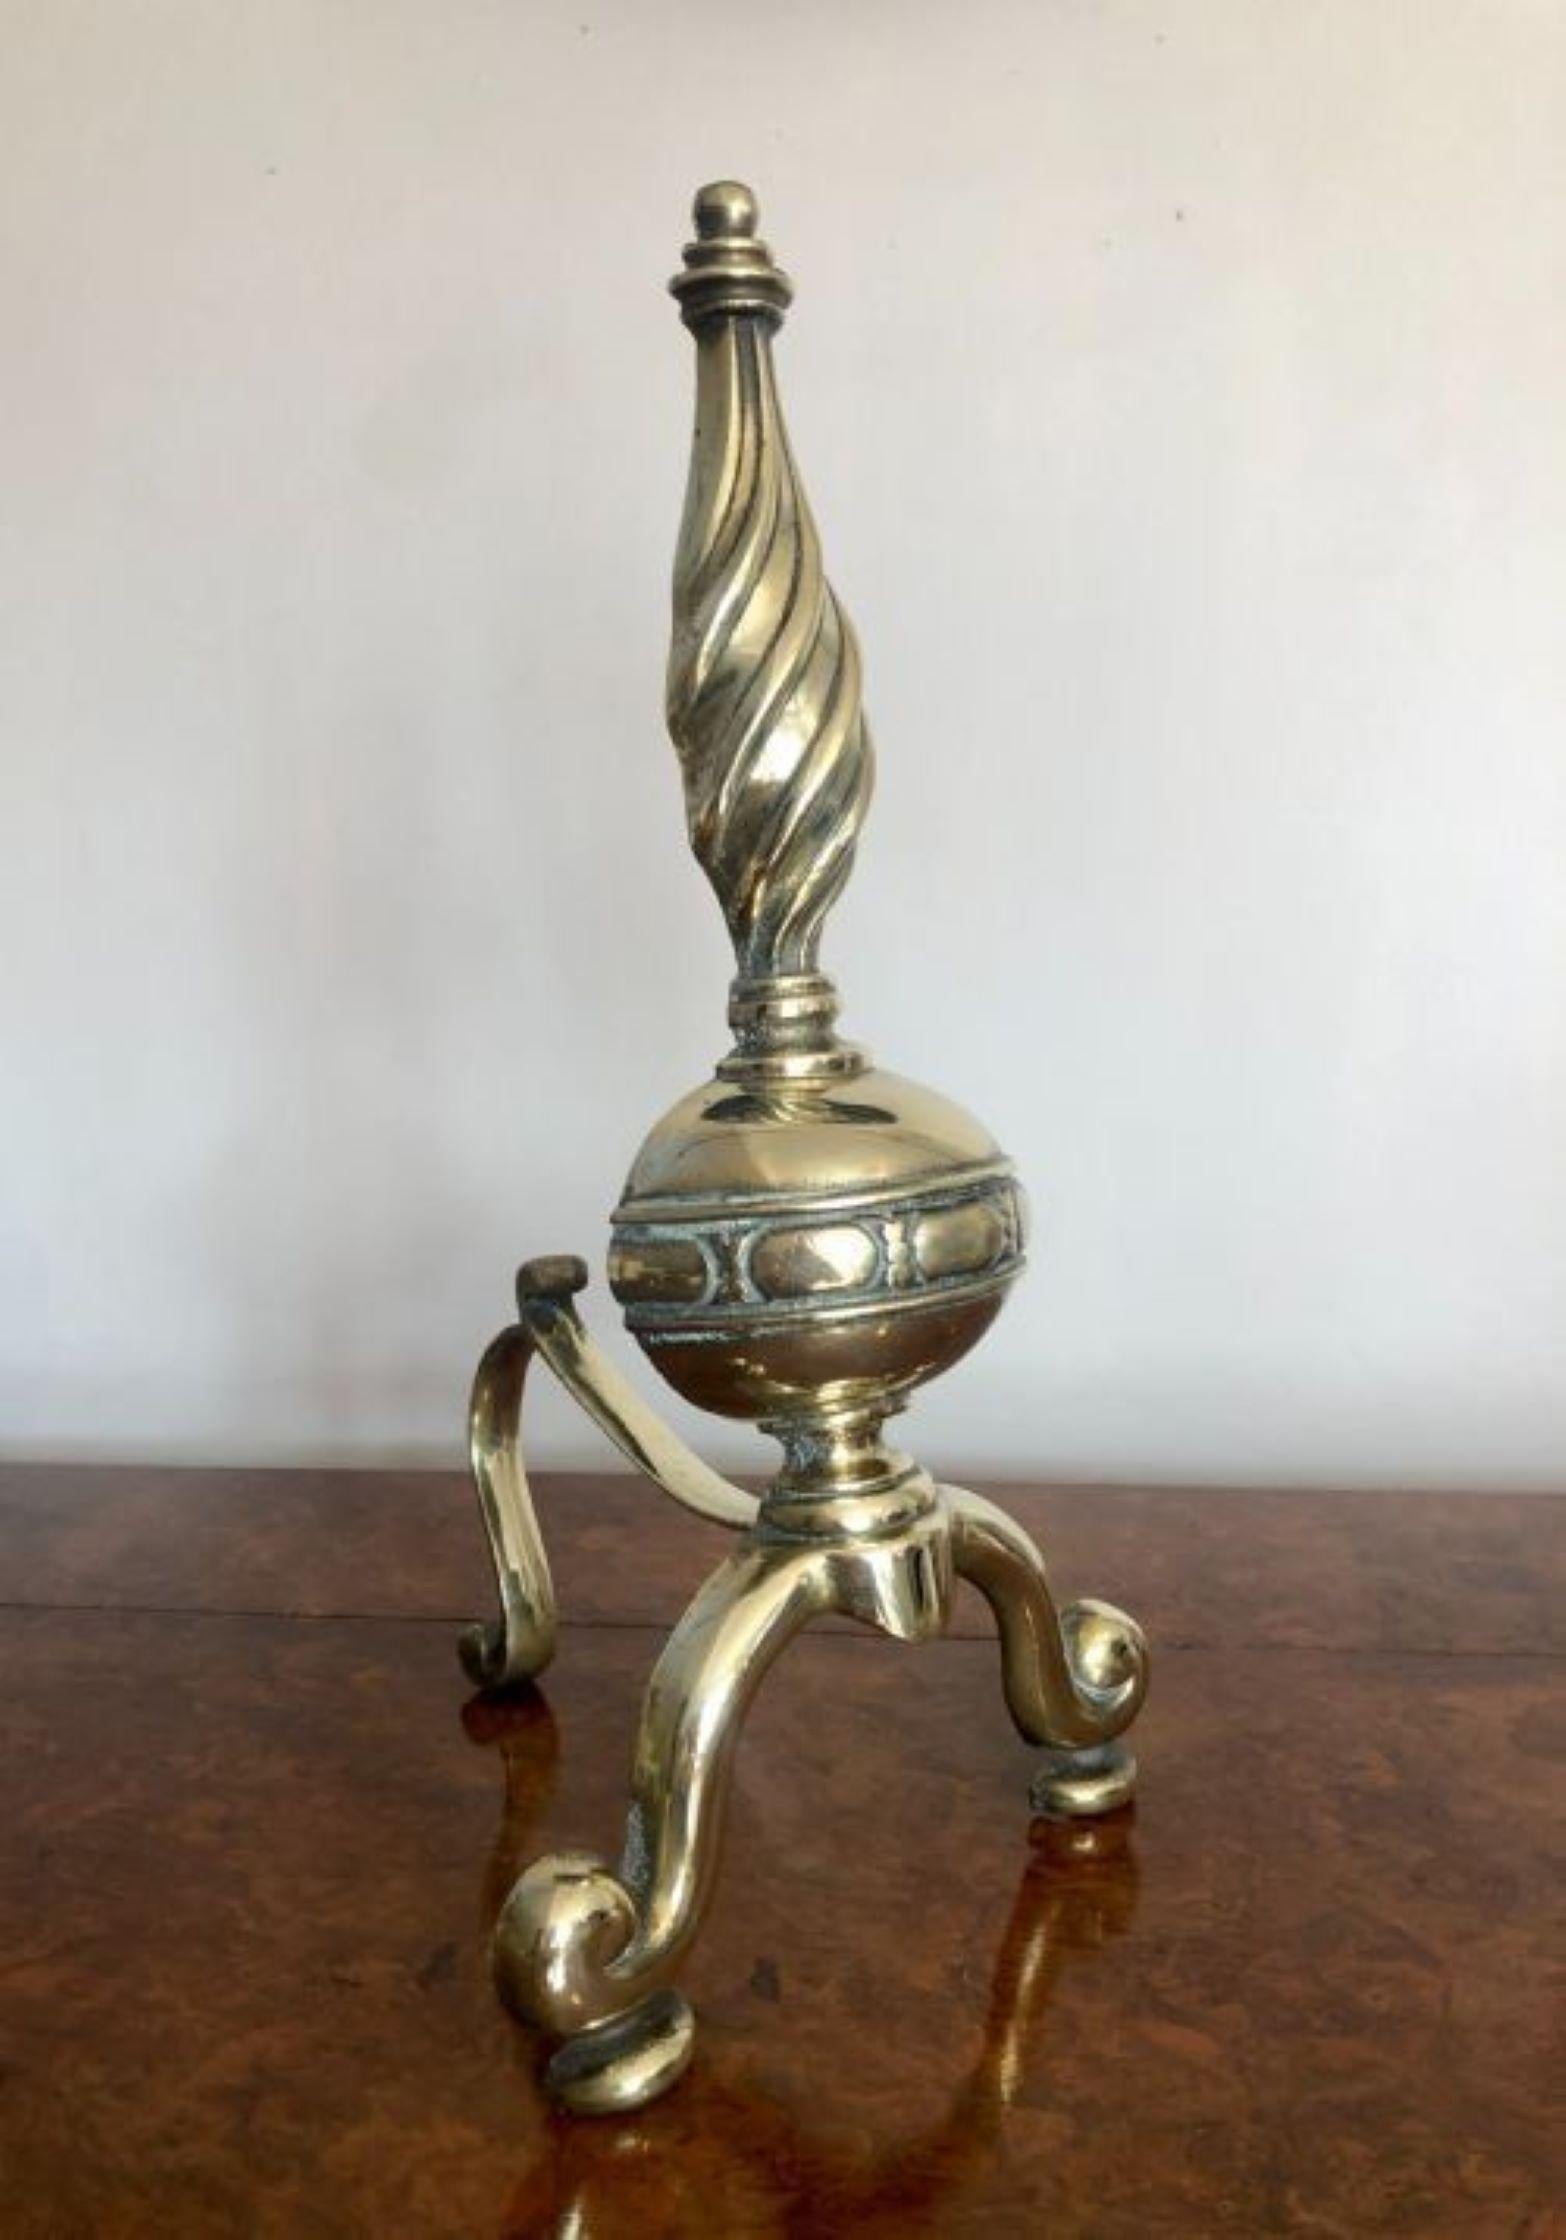 Outstanding quality antique Victorian brass fire dogs, having a rope twist shape top above a round ornate ball standing on shaped cabriole legs with scroll feet